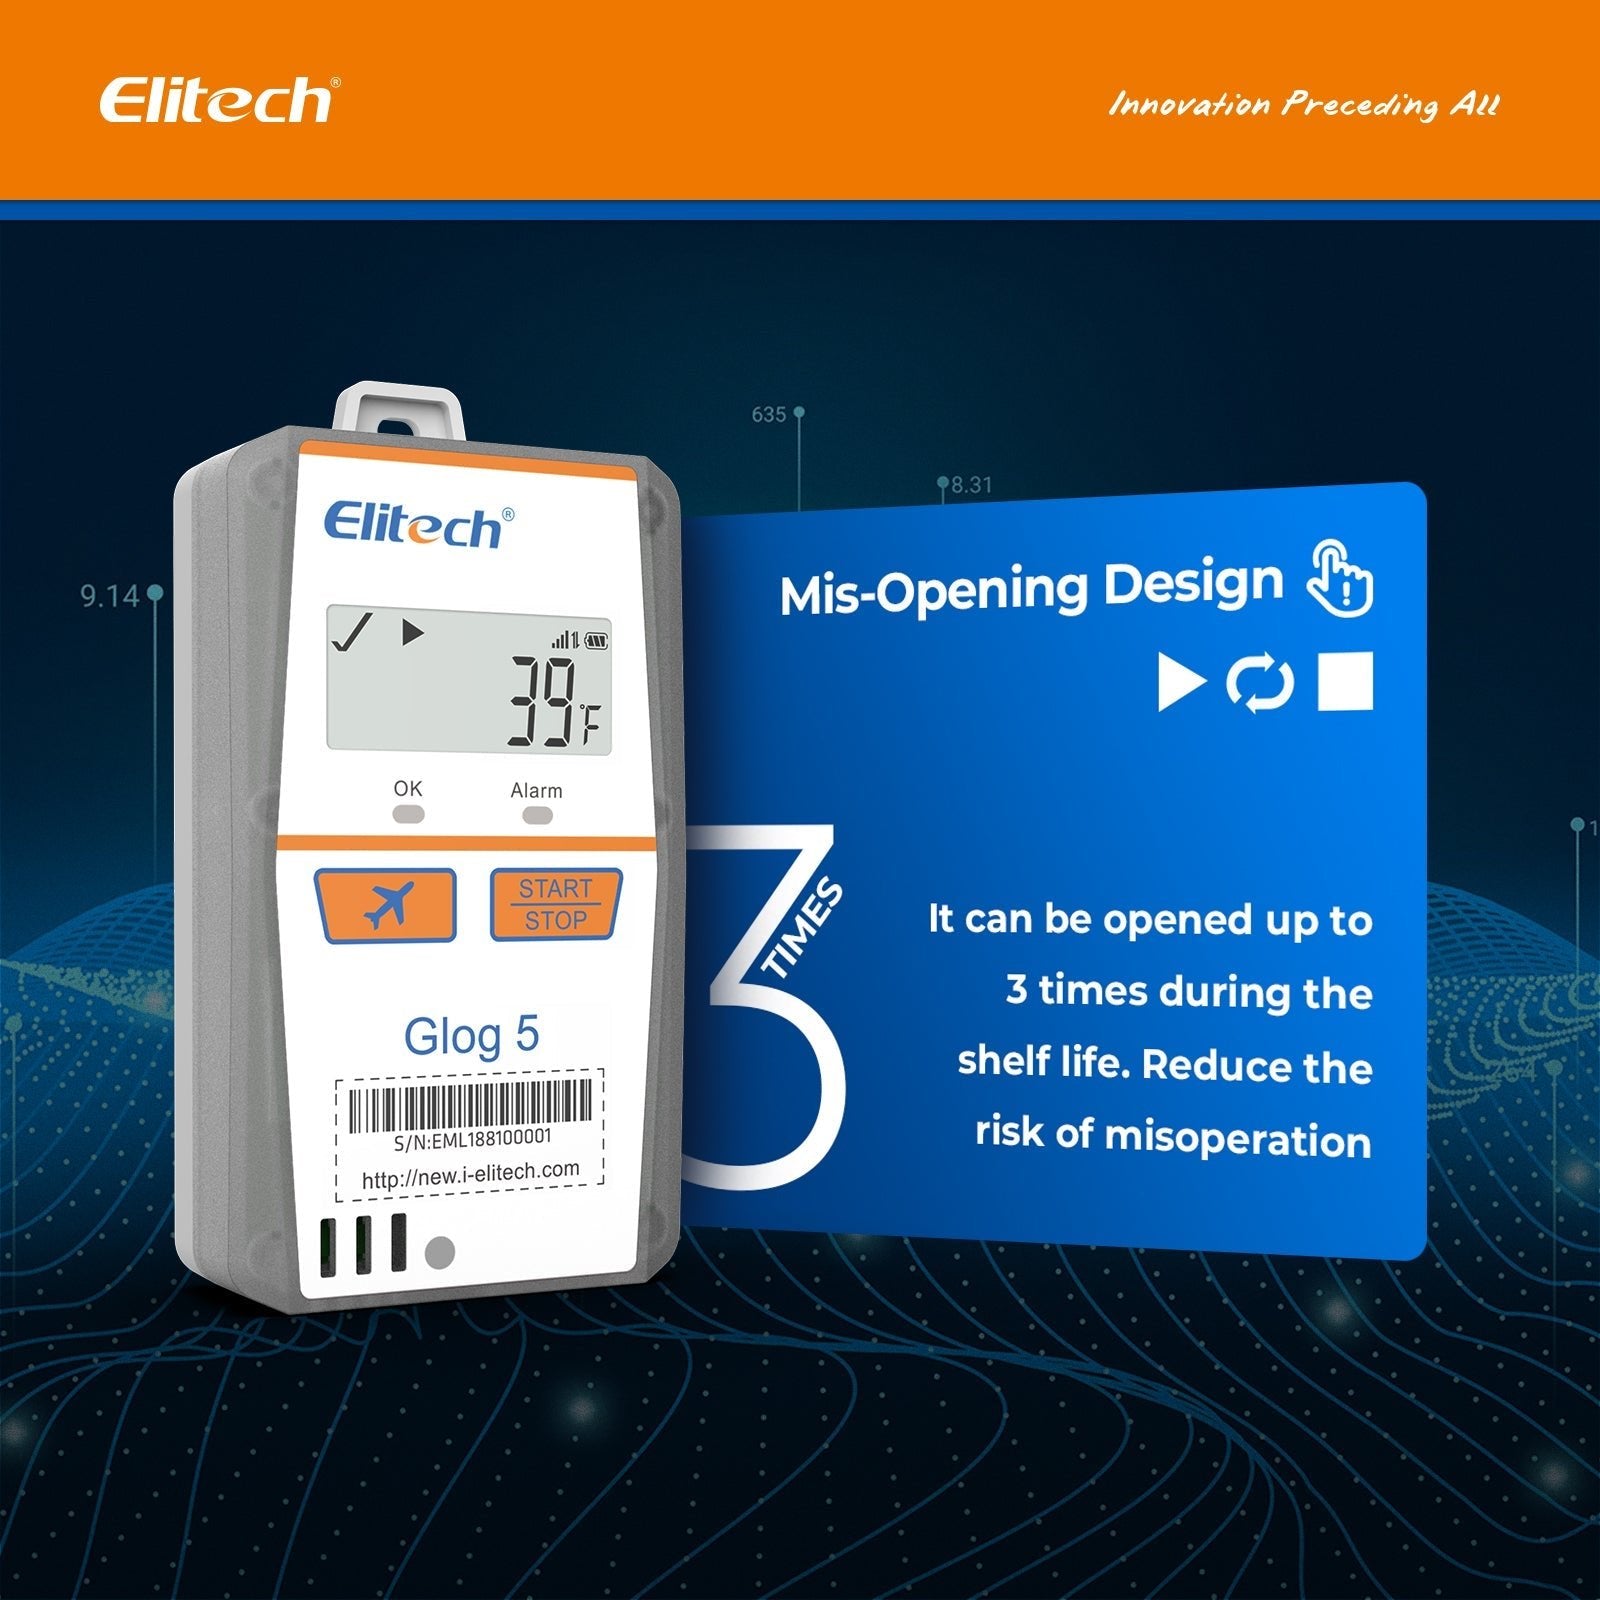 Elitech IOT Temperature Humidity Data Logger 4G Single-use, Shadow Data, 3-Times Accidental Touch, Auto Flight Mode, Light/Shock/Location, PDF/CSV Report, 32000 Points 30Days Glog5TH - Elitech Technology, Inc.